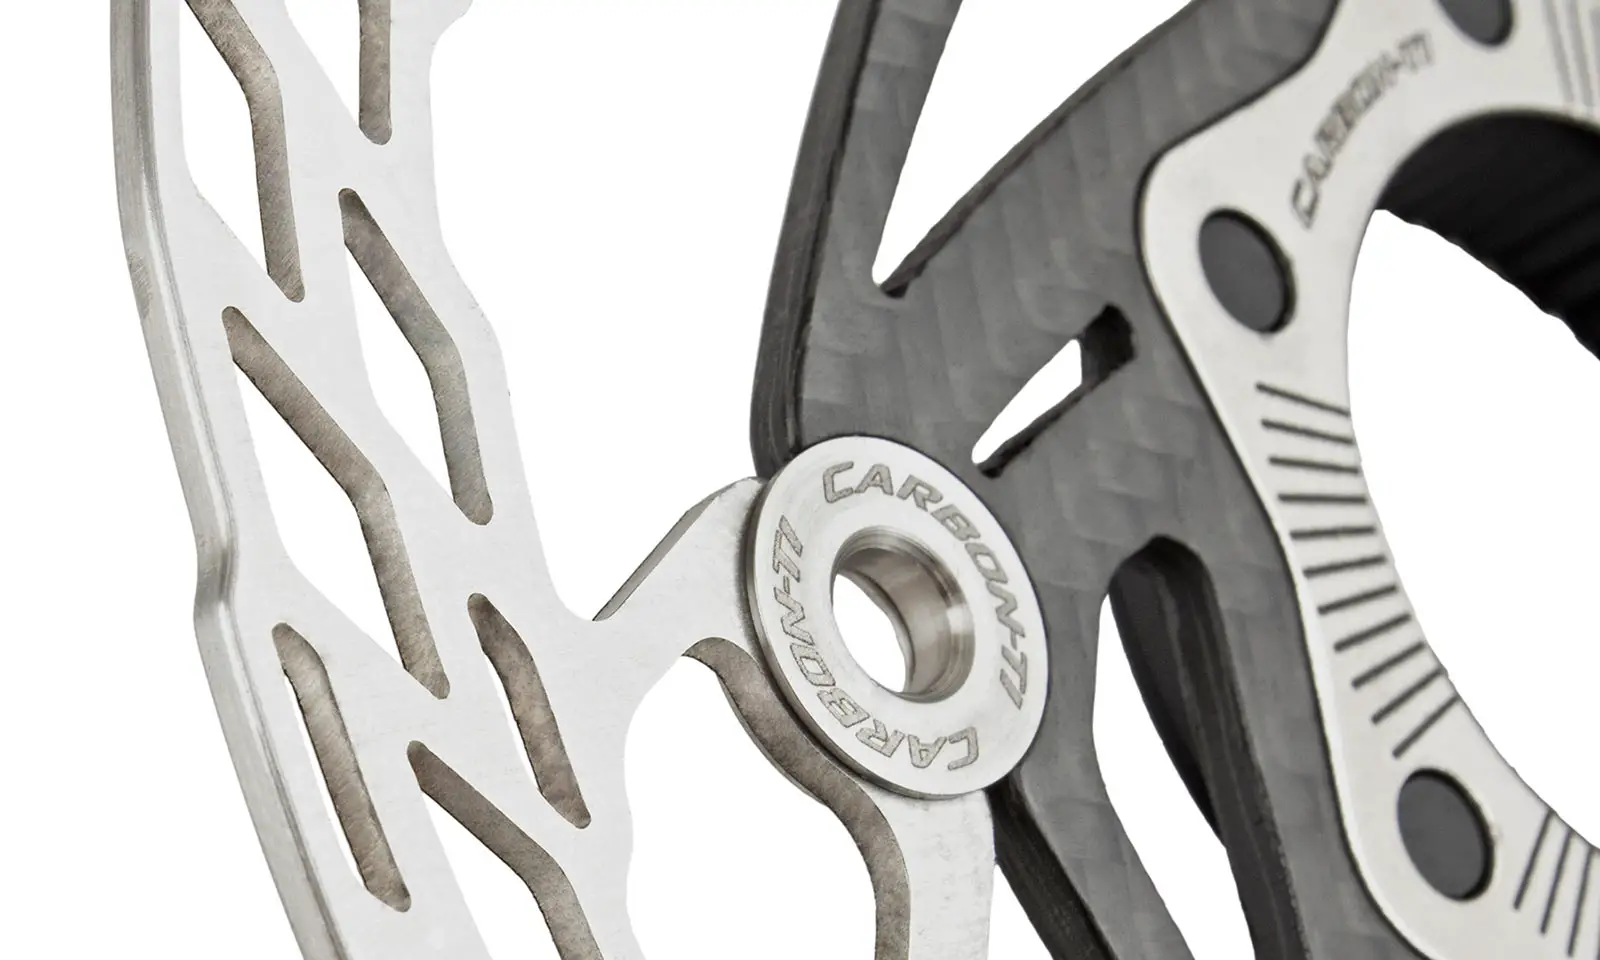 Carbon-Ti X-Rotor SteelCarbon 3 updated lightweight 6-bolt or Centerlock disc brake rotors, new rounded edge